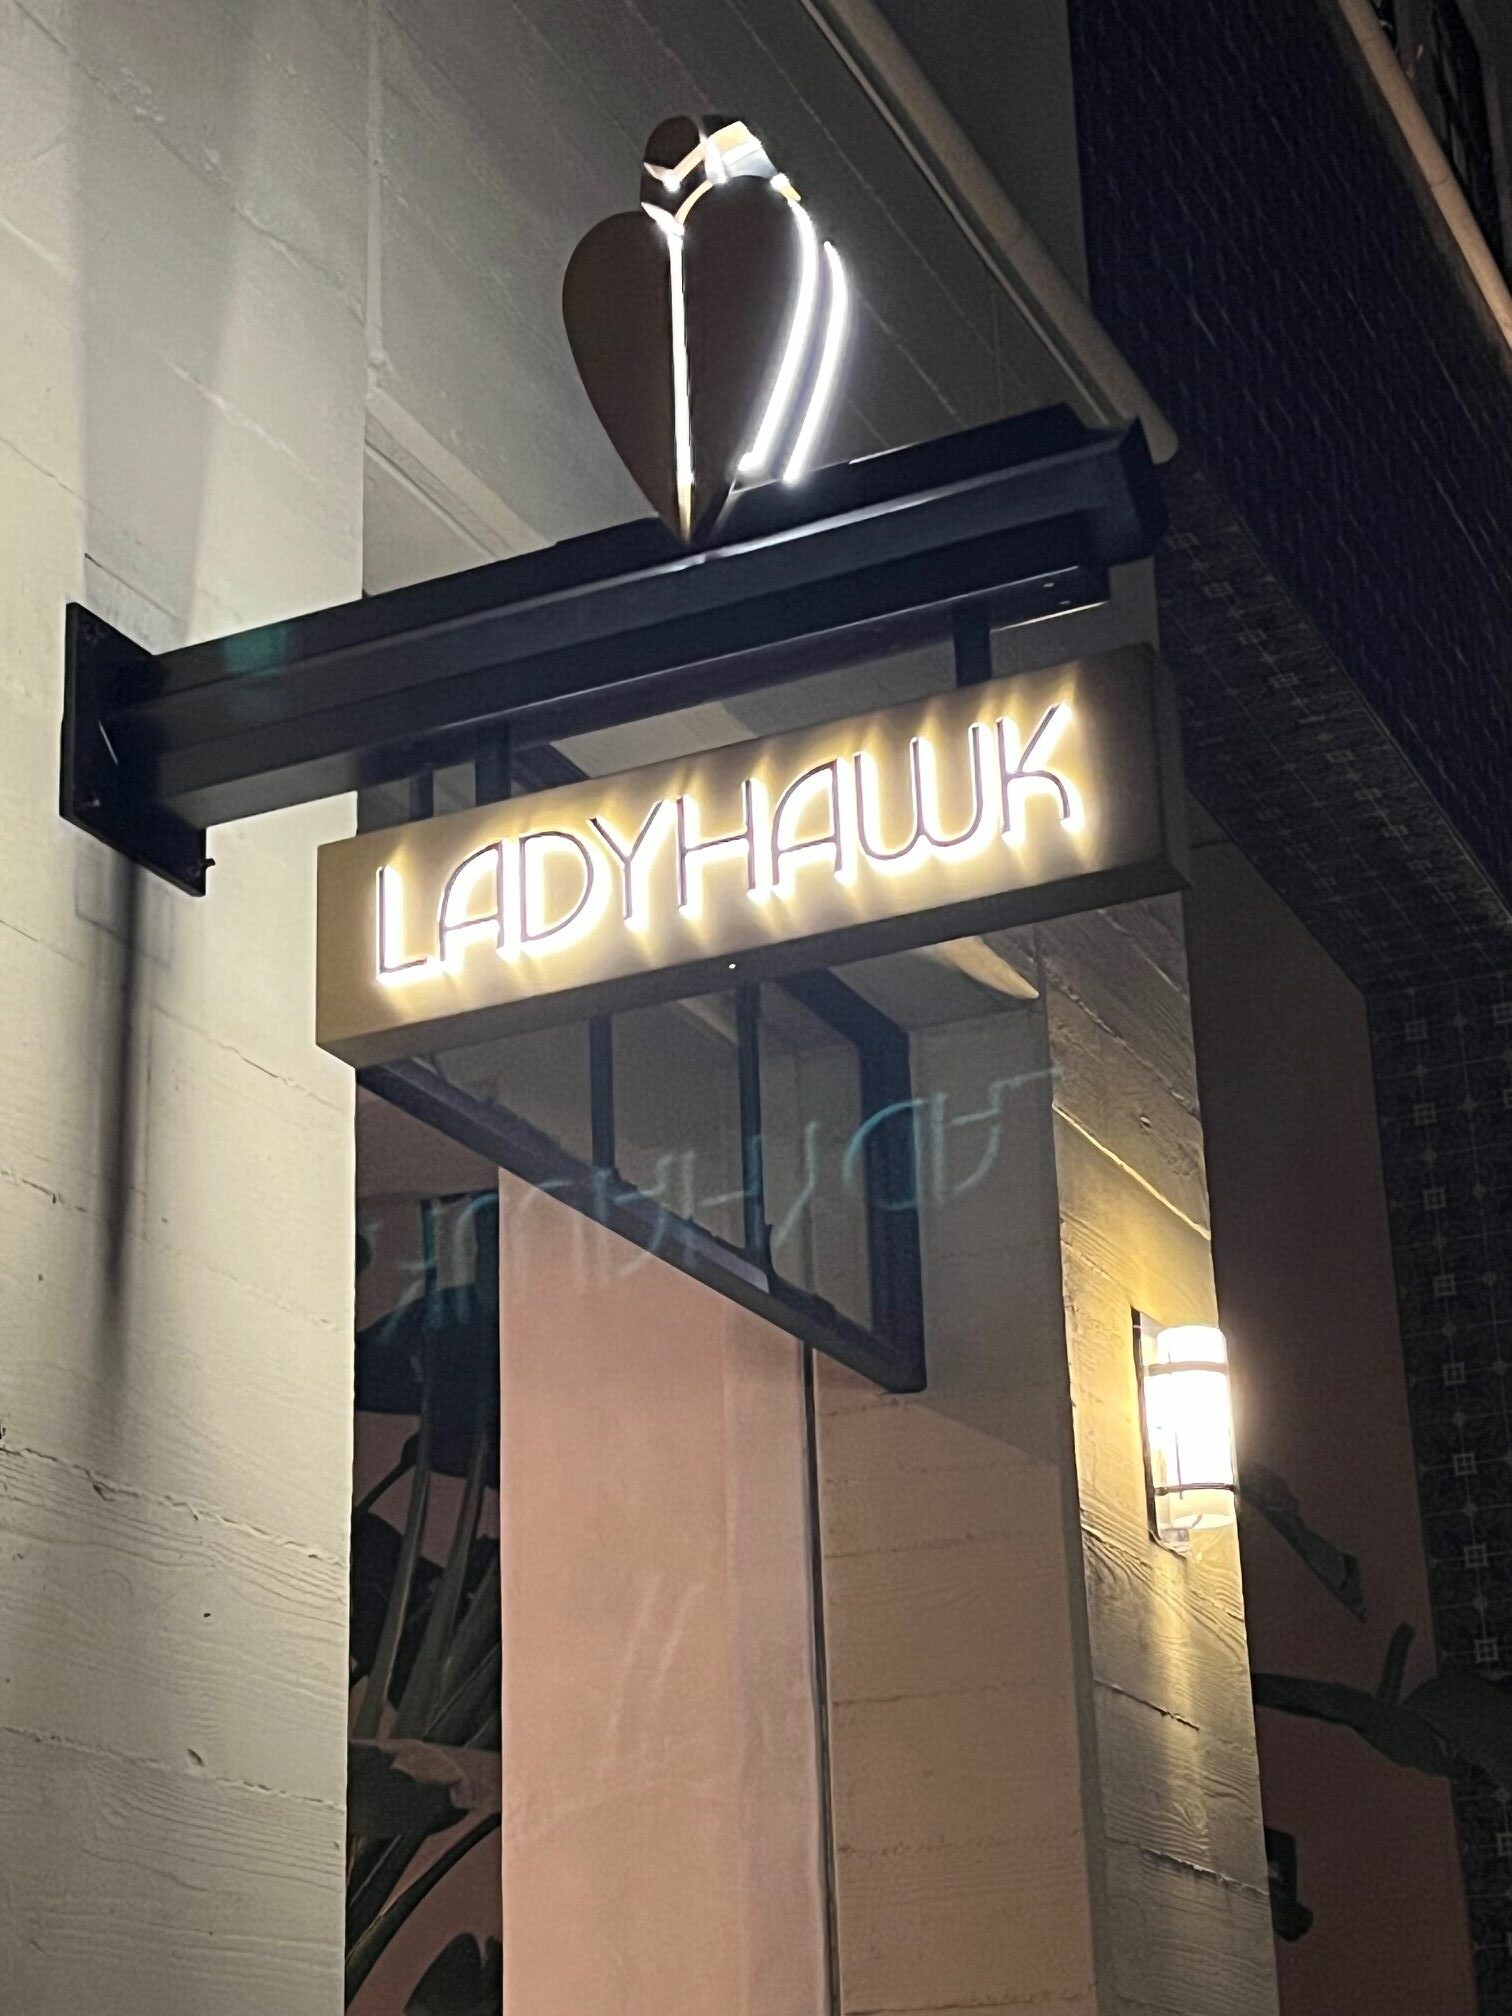 An image of the sign of one of the best West Hollywood restaurants, Ladyhawk.